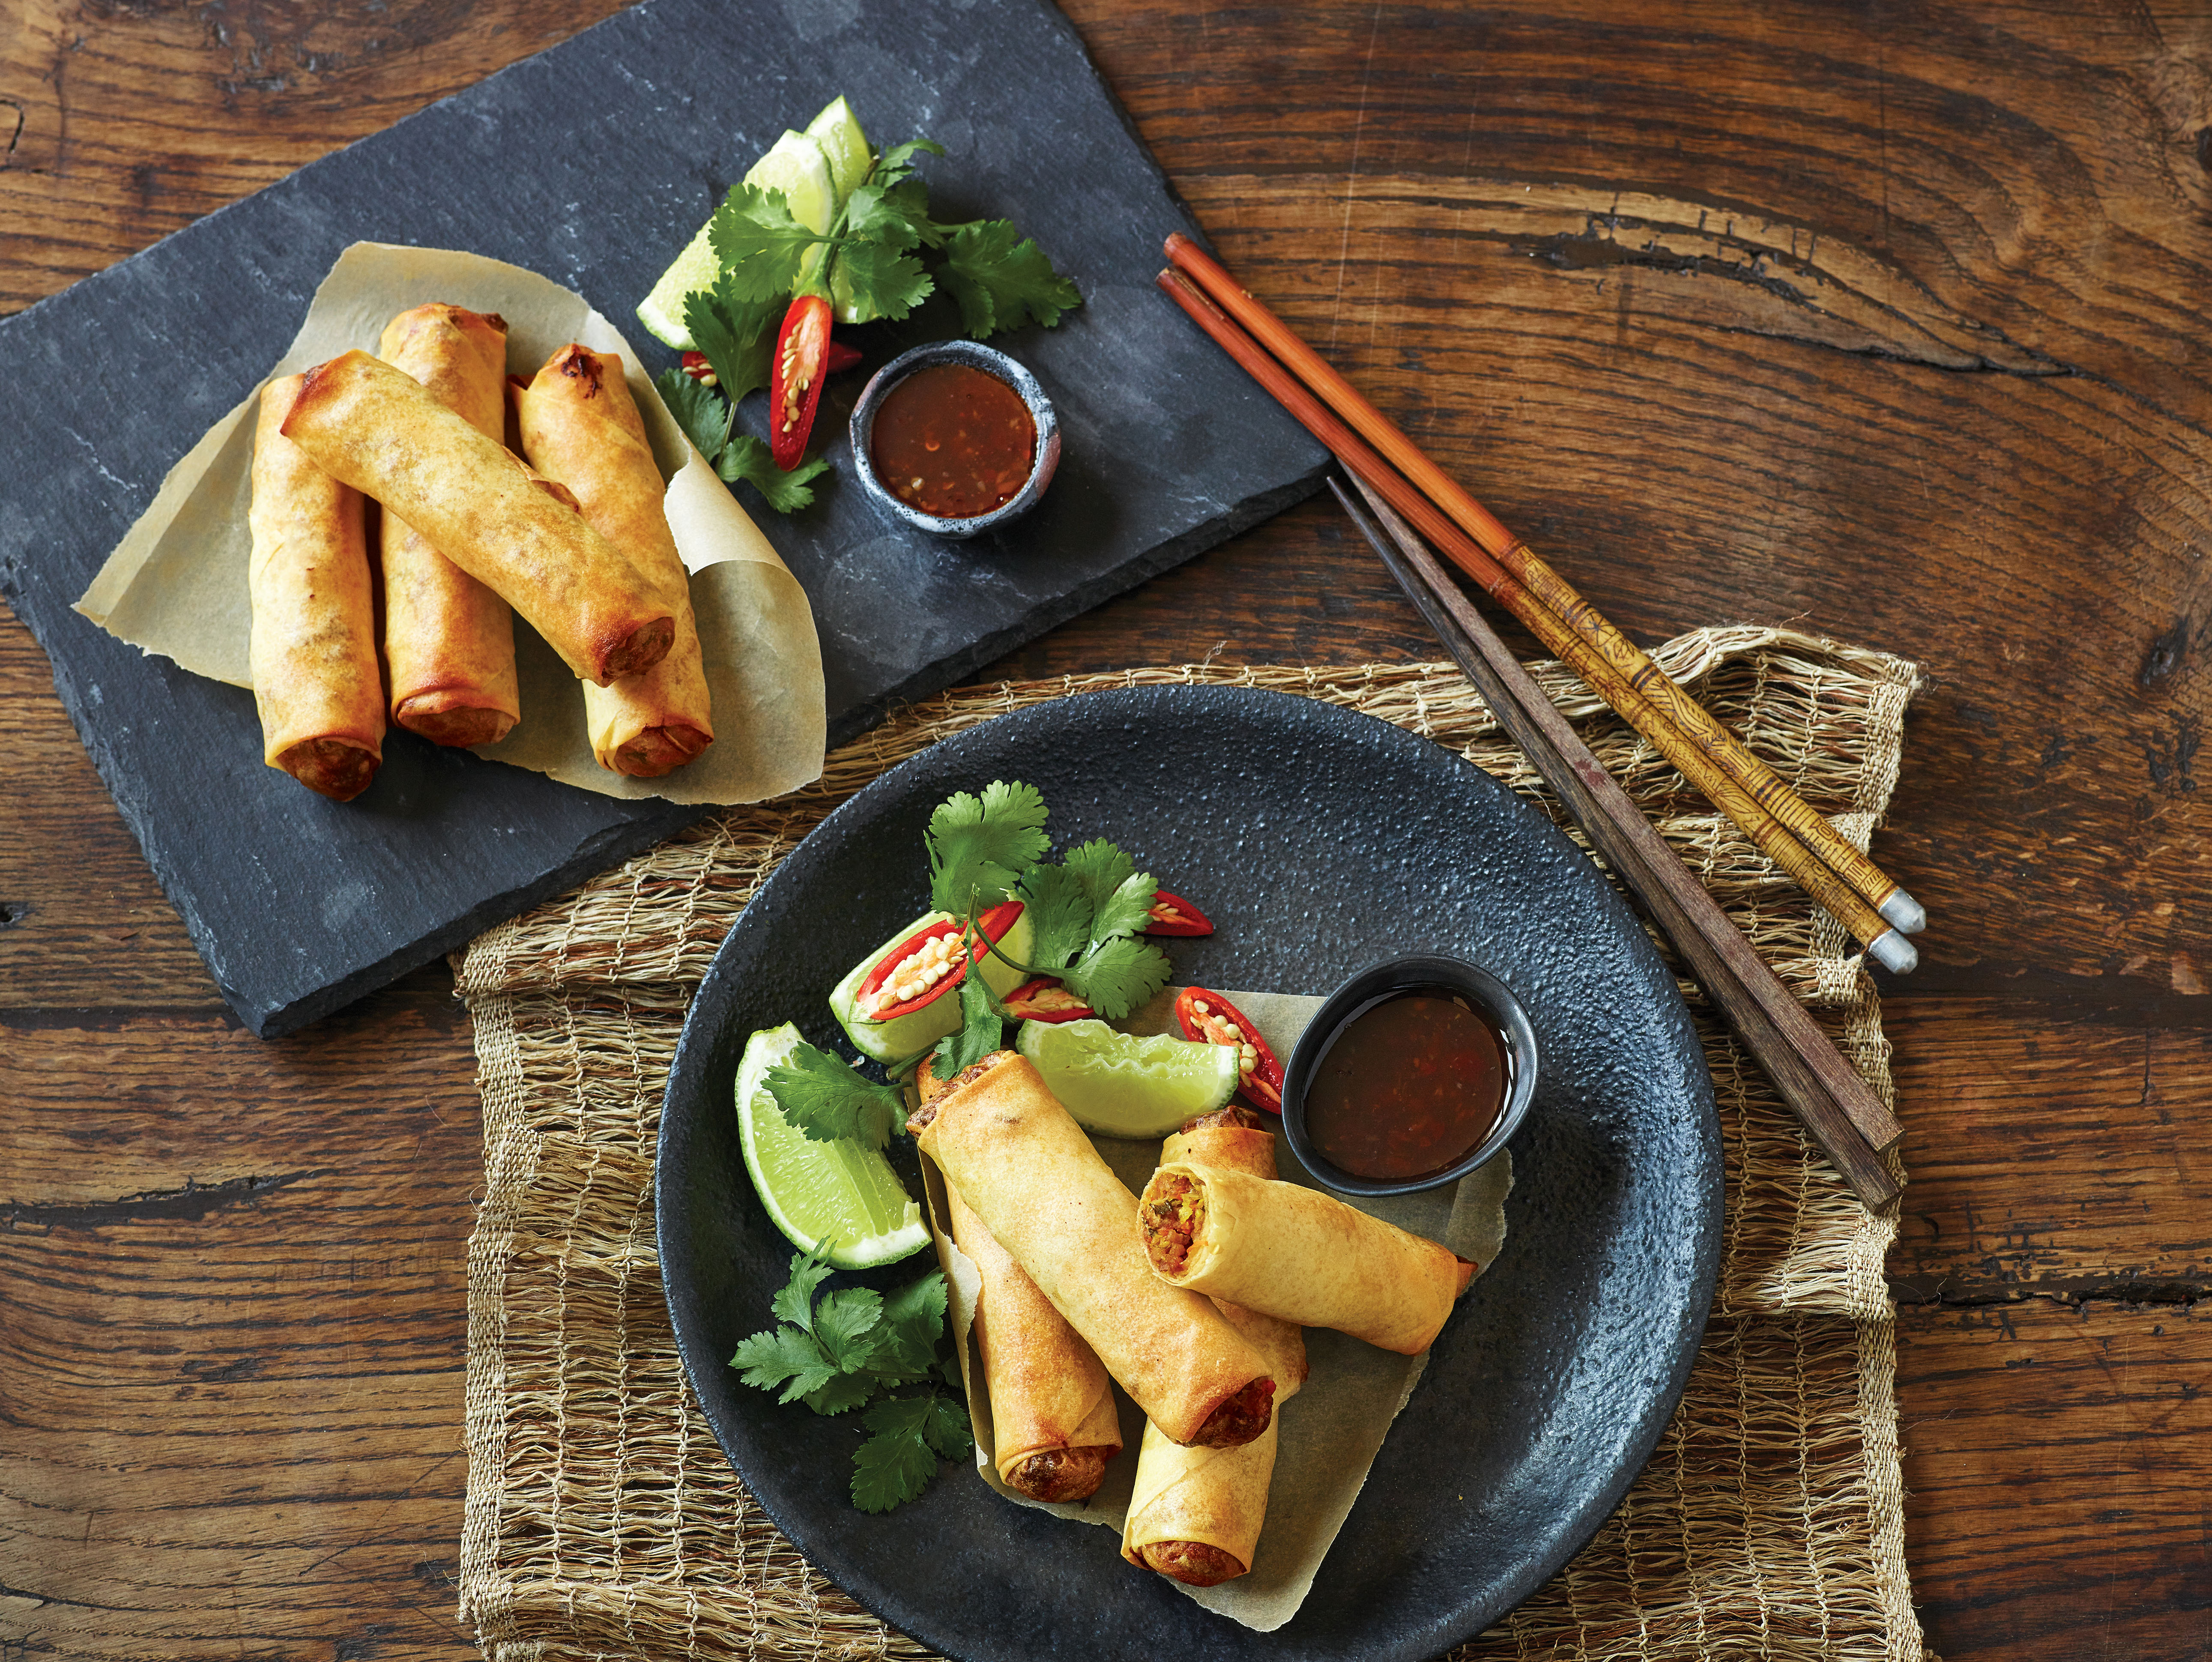 https://prod-app.breville.com/original/recipe/1650945640/Air+Fried+Spring+Rolls+with+Sweet+Chili+Dipping+Sauce_1.jpg